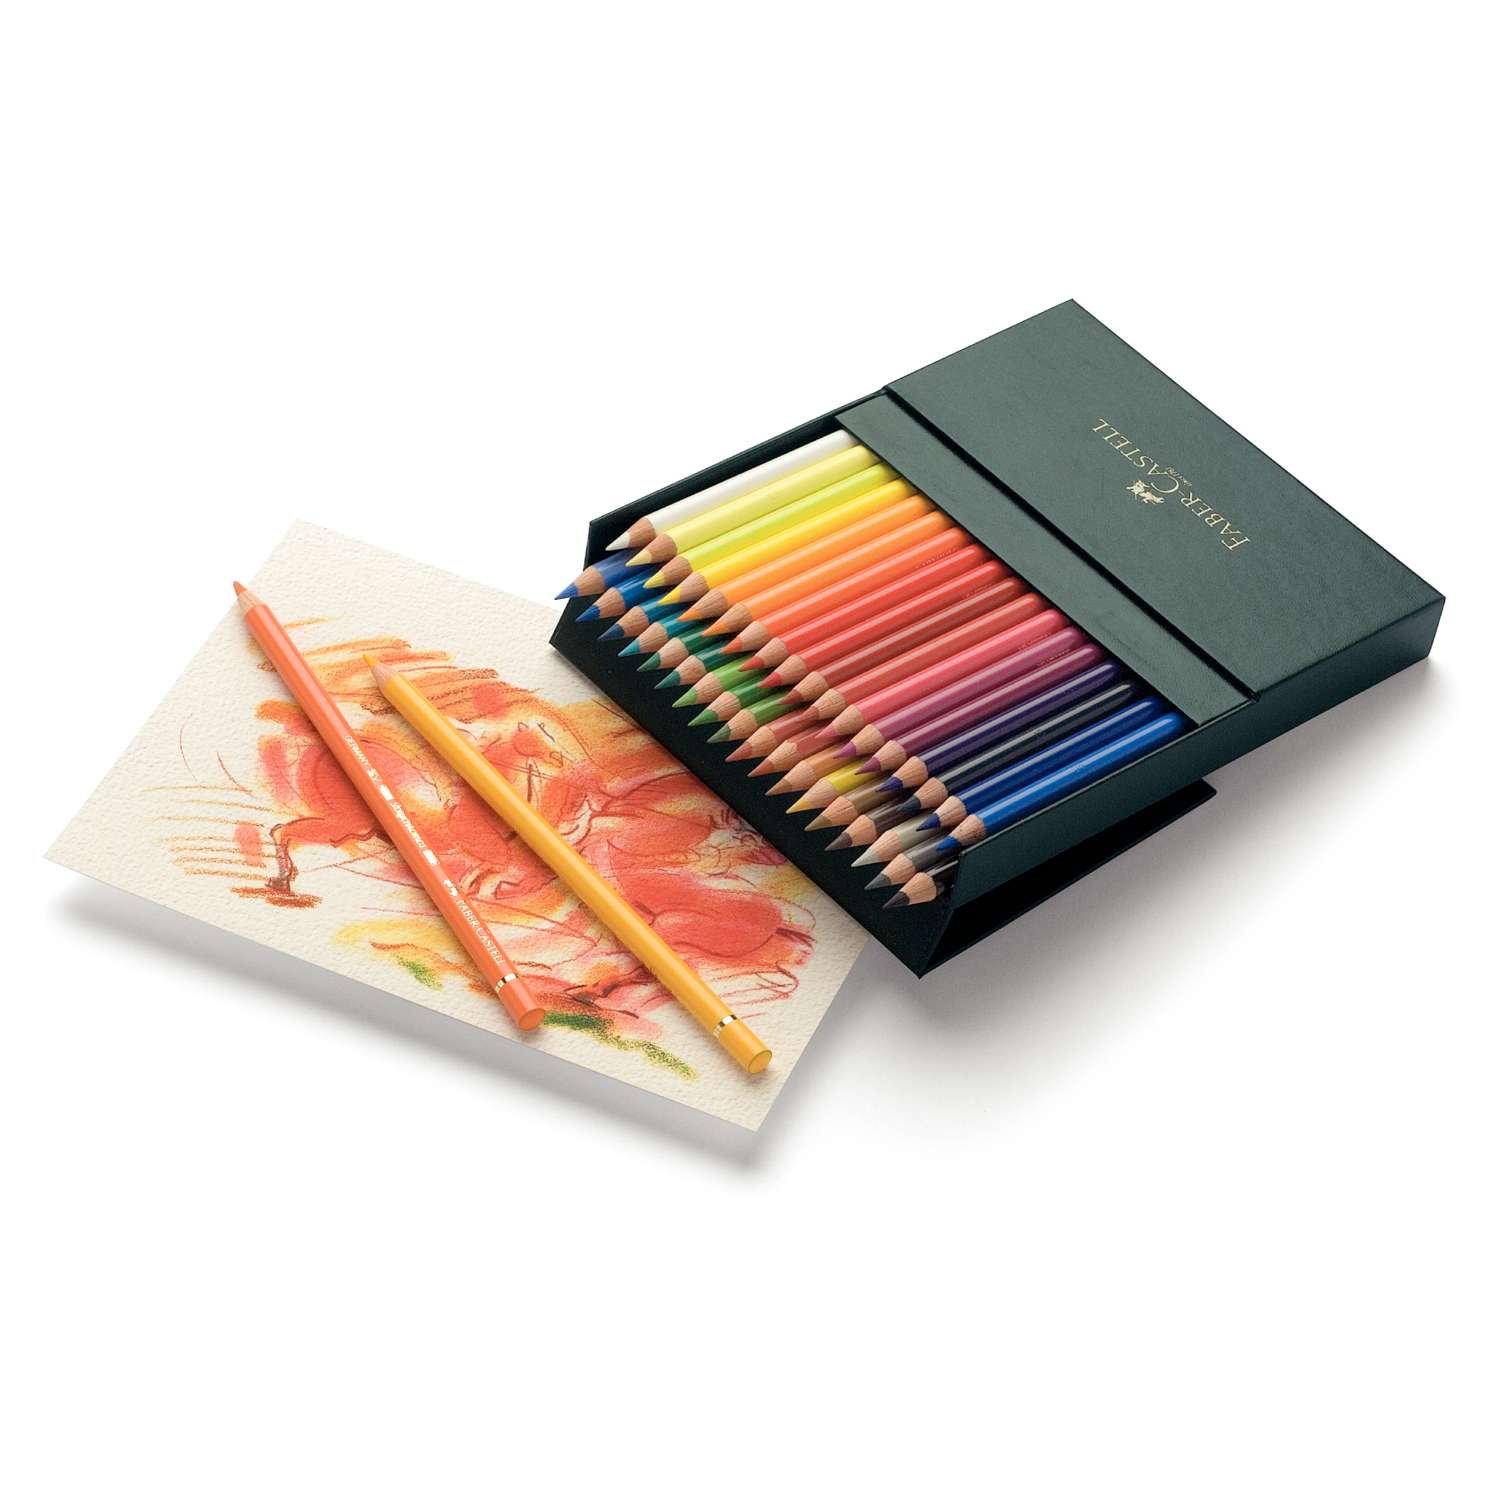 FABER CASTELL Atelierbox